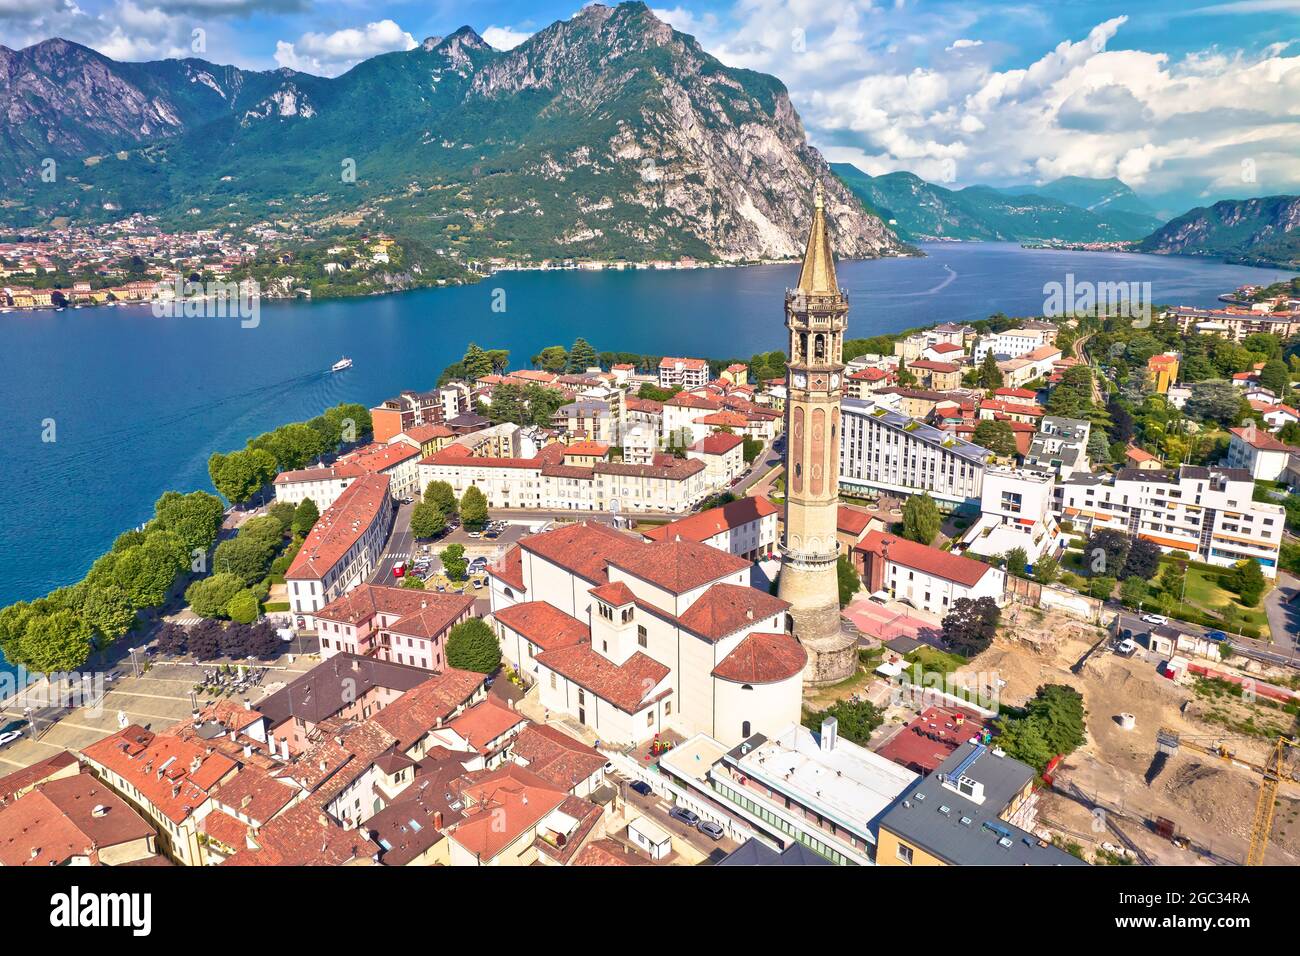 Town of Lecco aerial panoramic view, Como Lake in Lombardy region of Italy Stock Photo